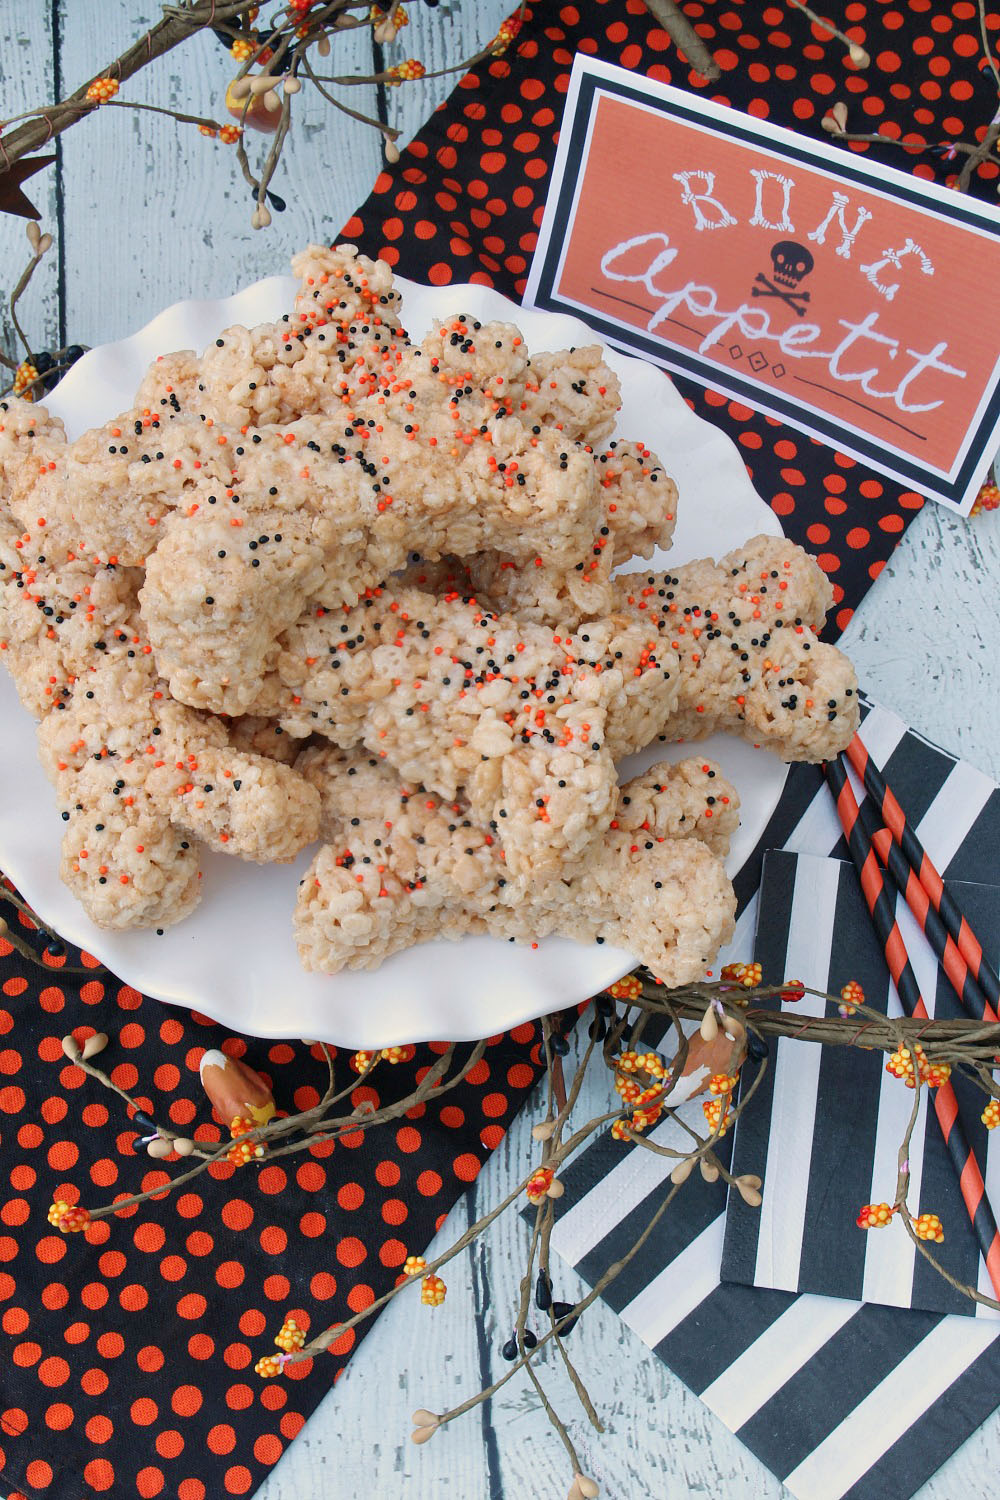 Halloween Bones Rice Krispie Treats. These would be so cute for Halloween parties or Halloween class treats! Free printable too!